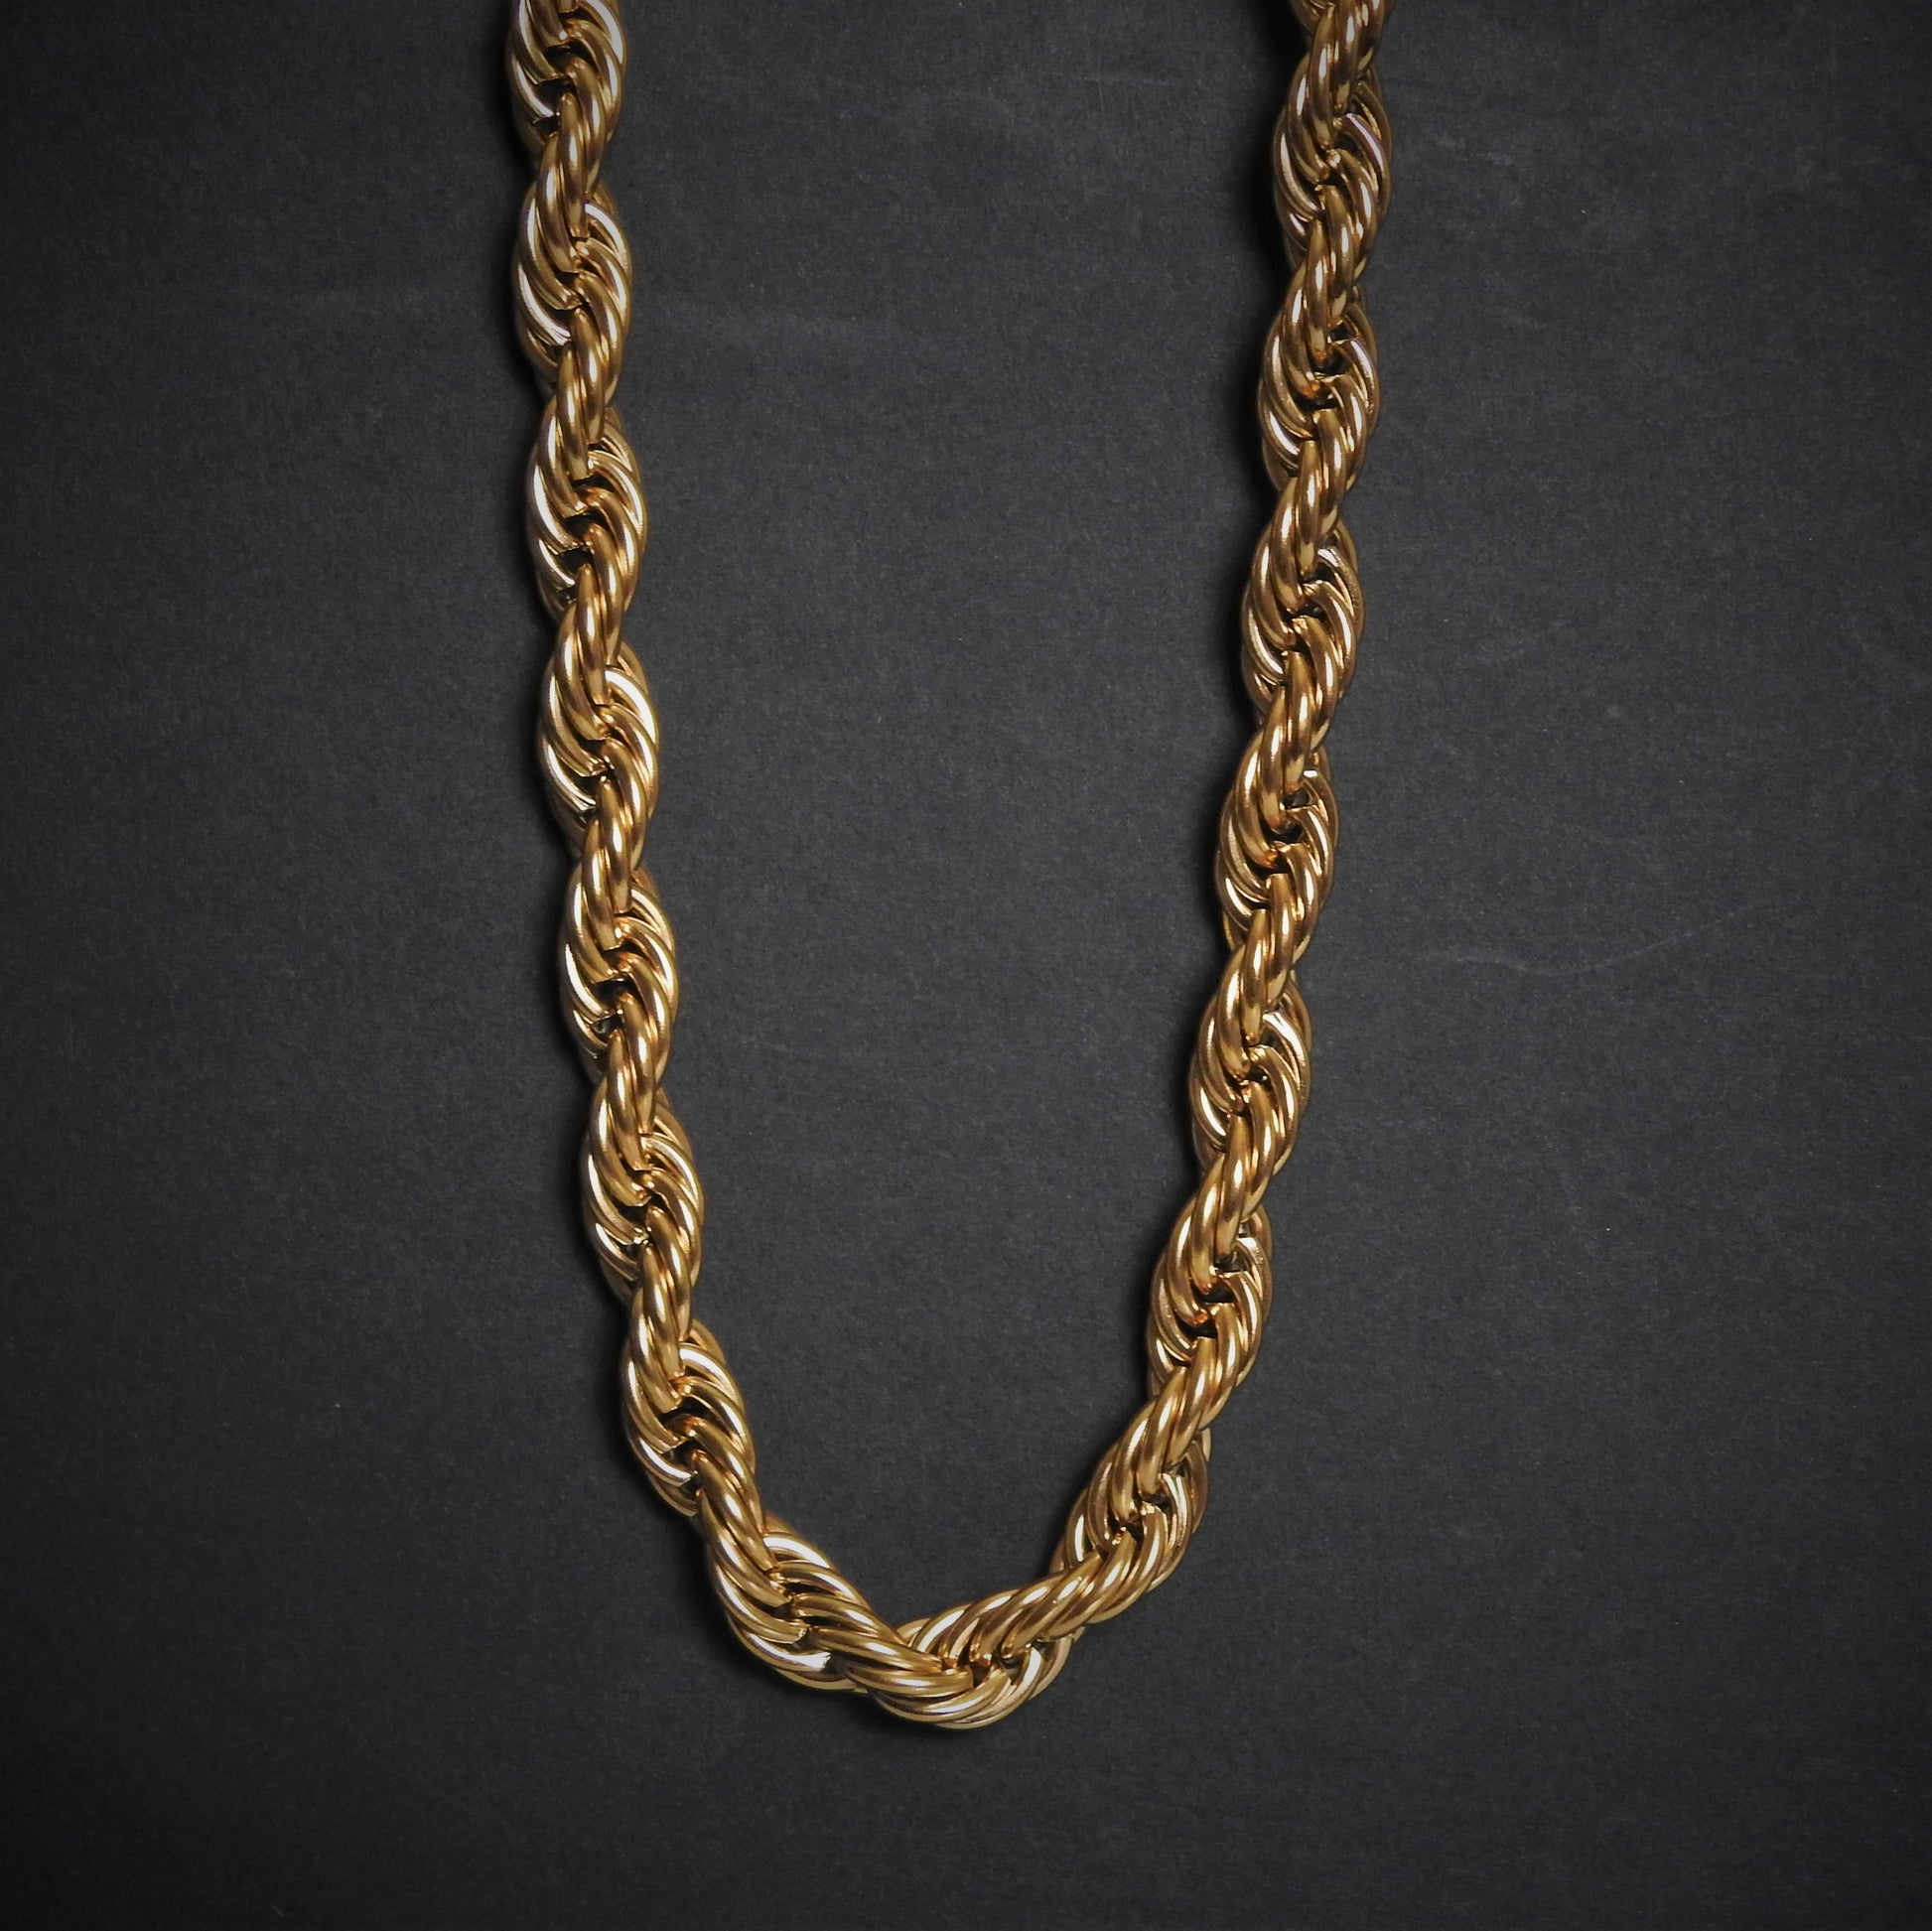 Rope Chain 10mm - Gold Dealers